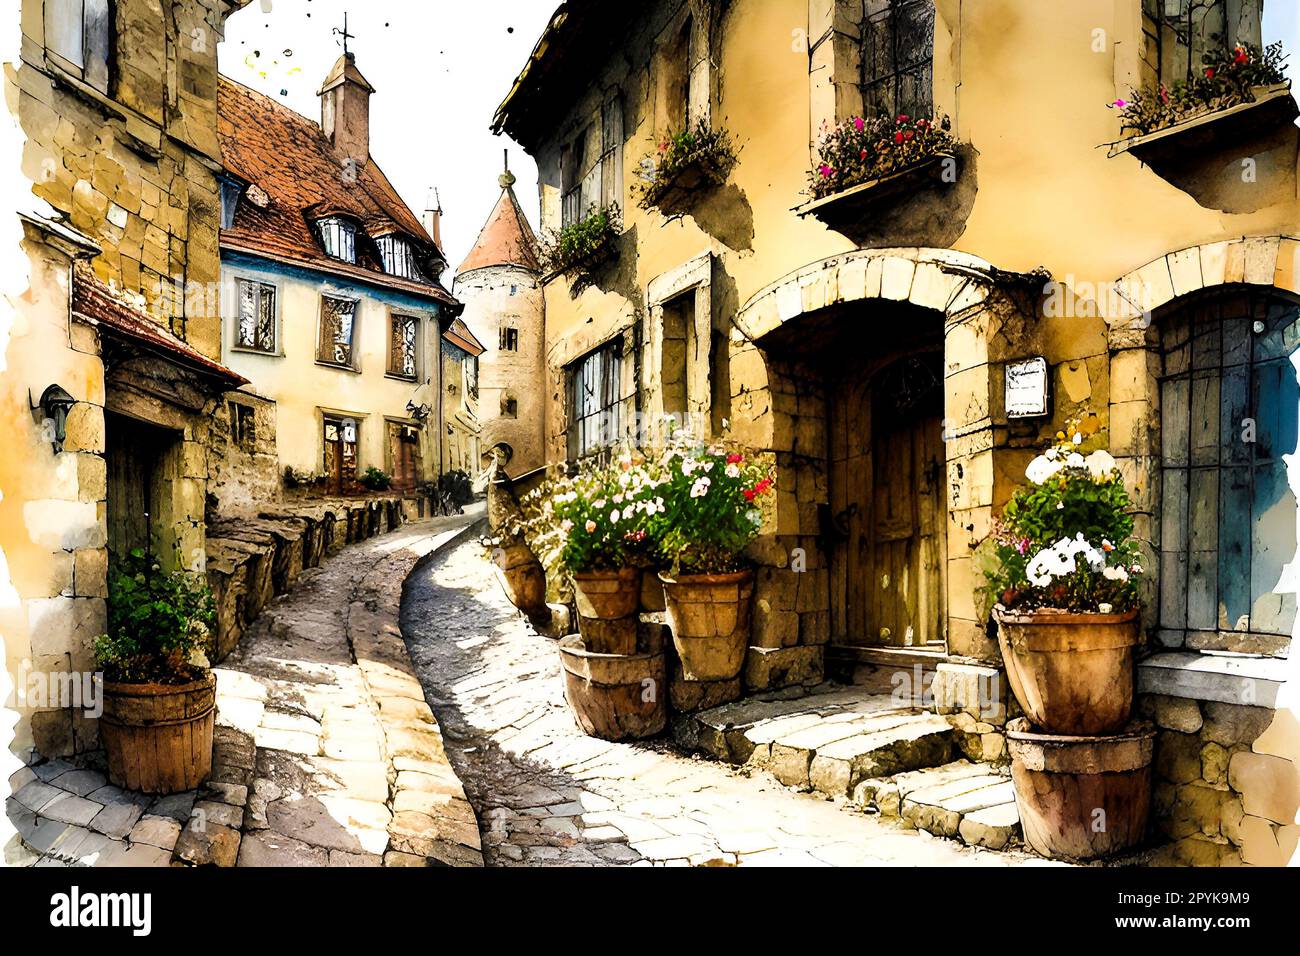 Old street with flowers in the old town of Tallinn, Estonia Stock Photo